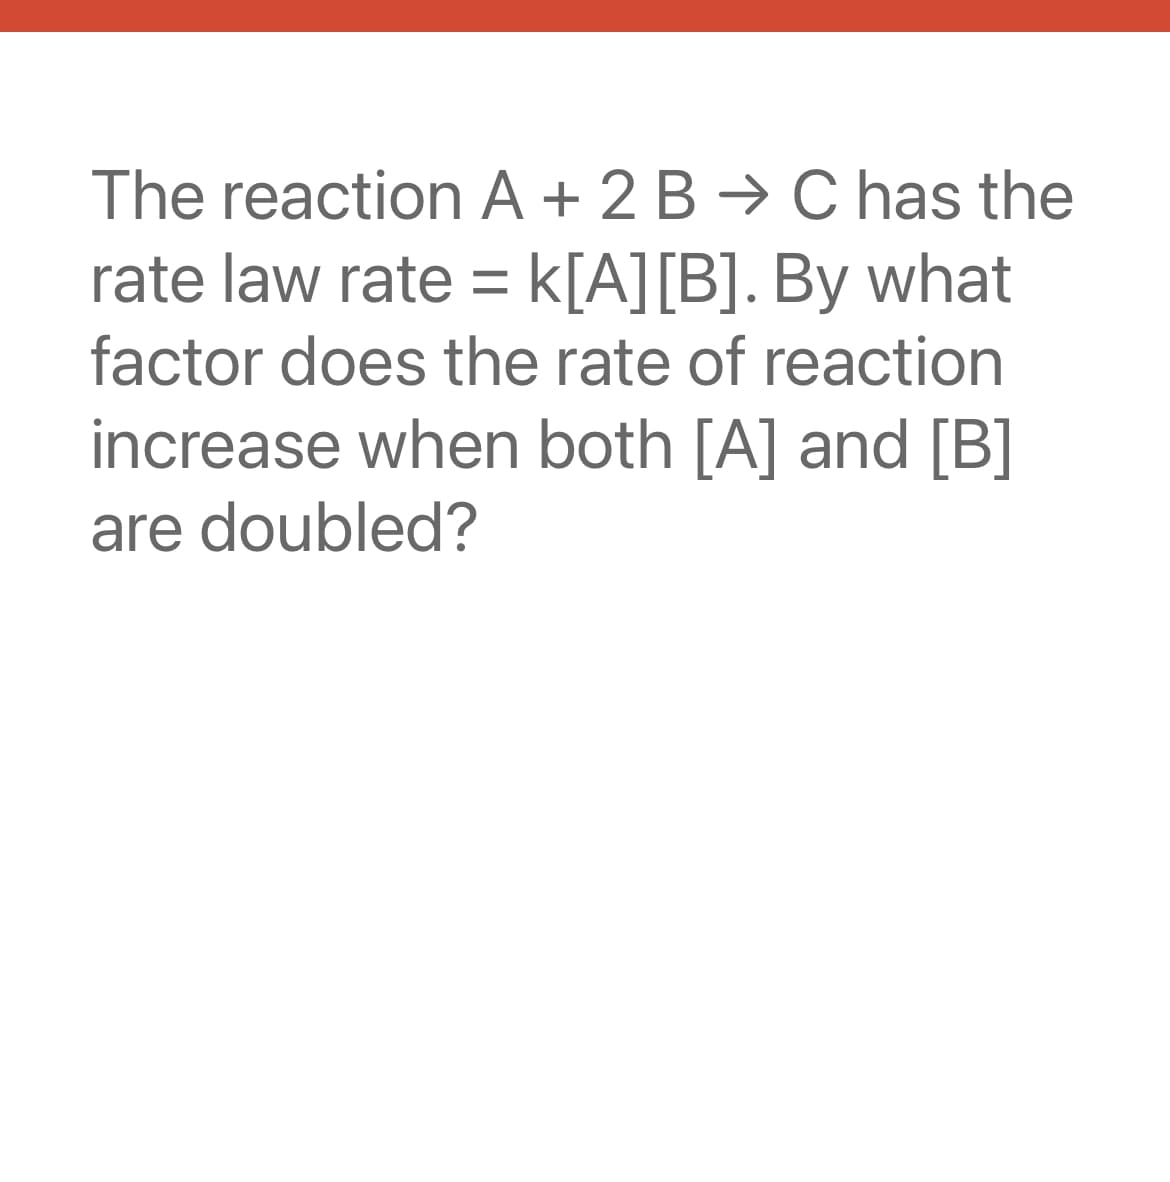 The reaction A + 2B → C has the
rate law rate = K[A] [B]. By what
factor does the rate of reaction
increase when both [A] and [B]
are doubled?